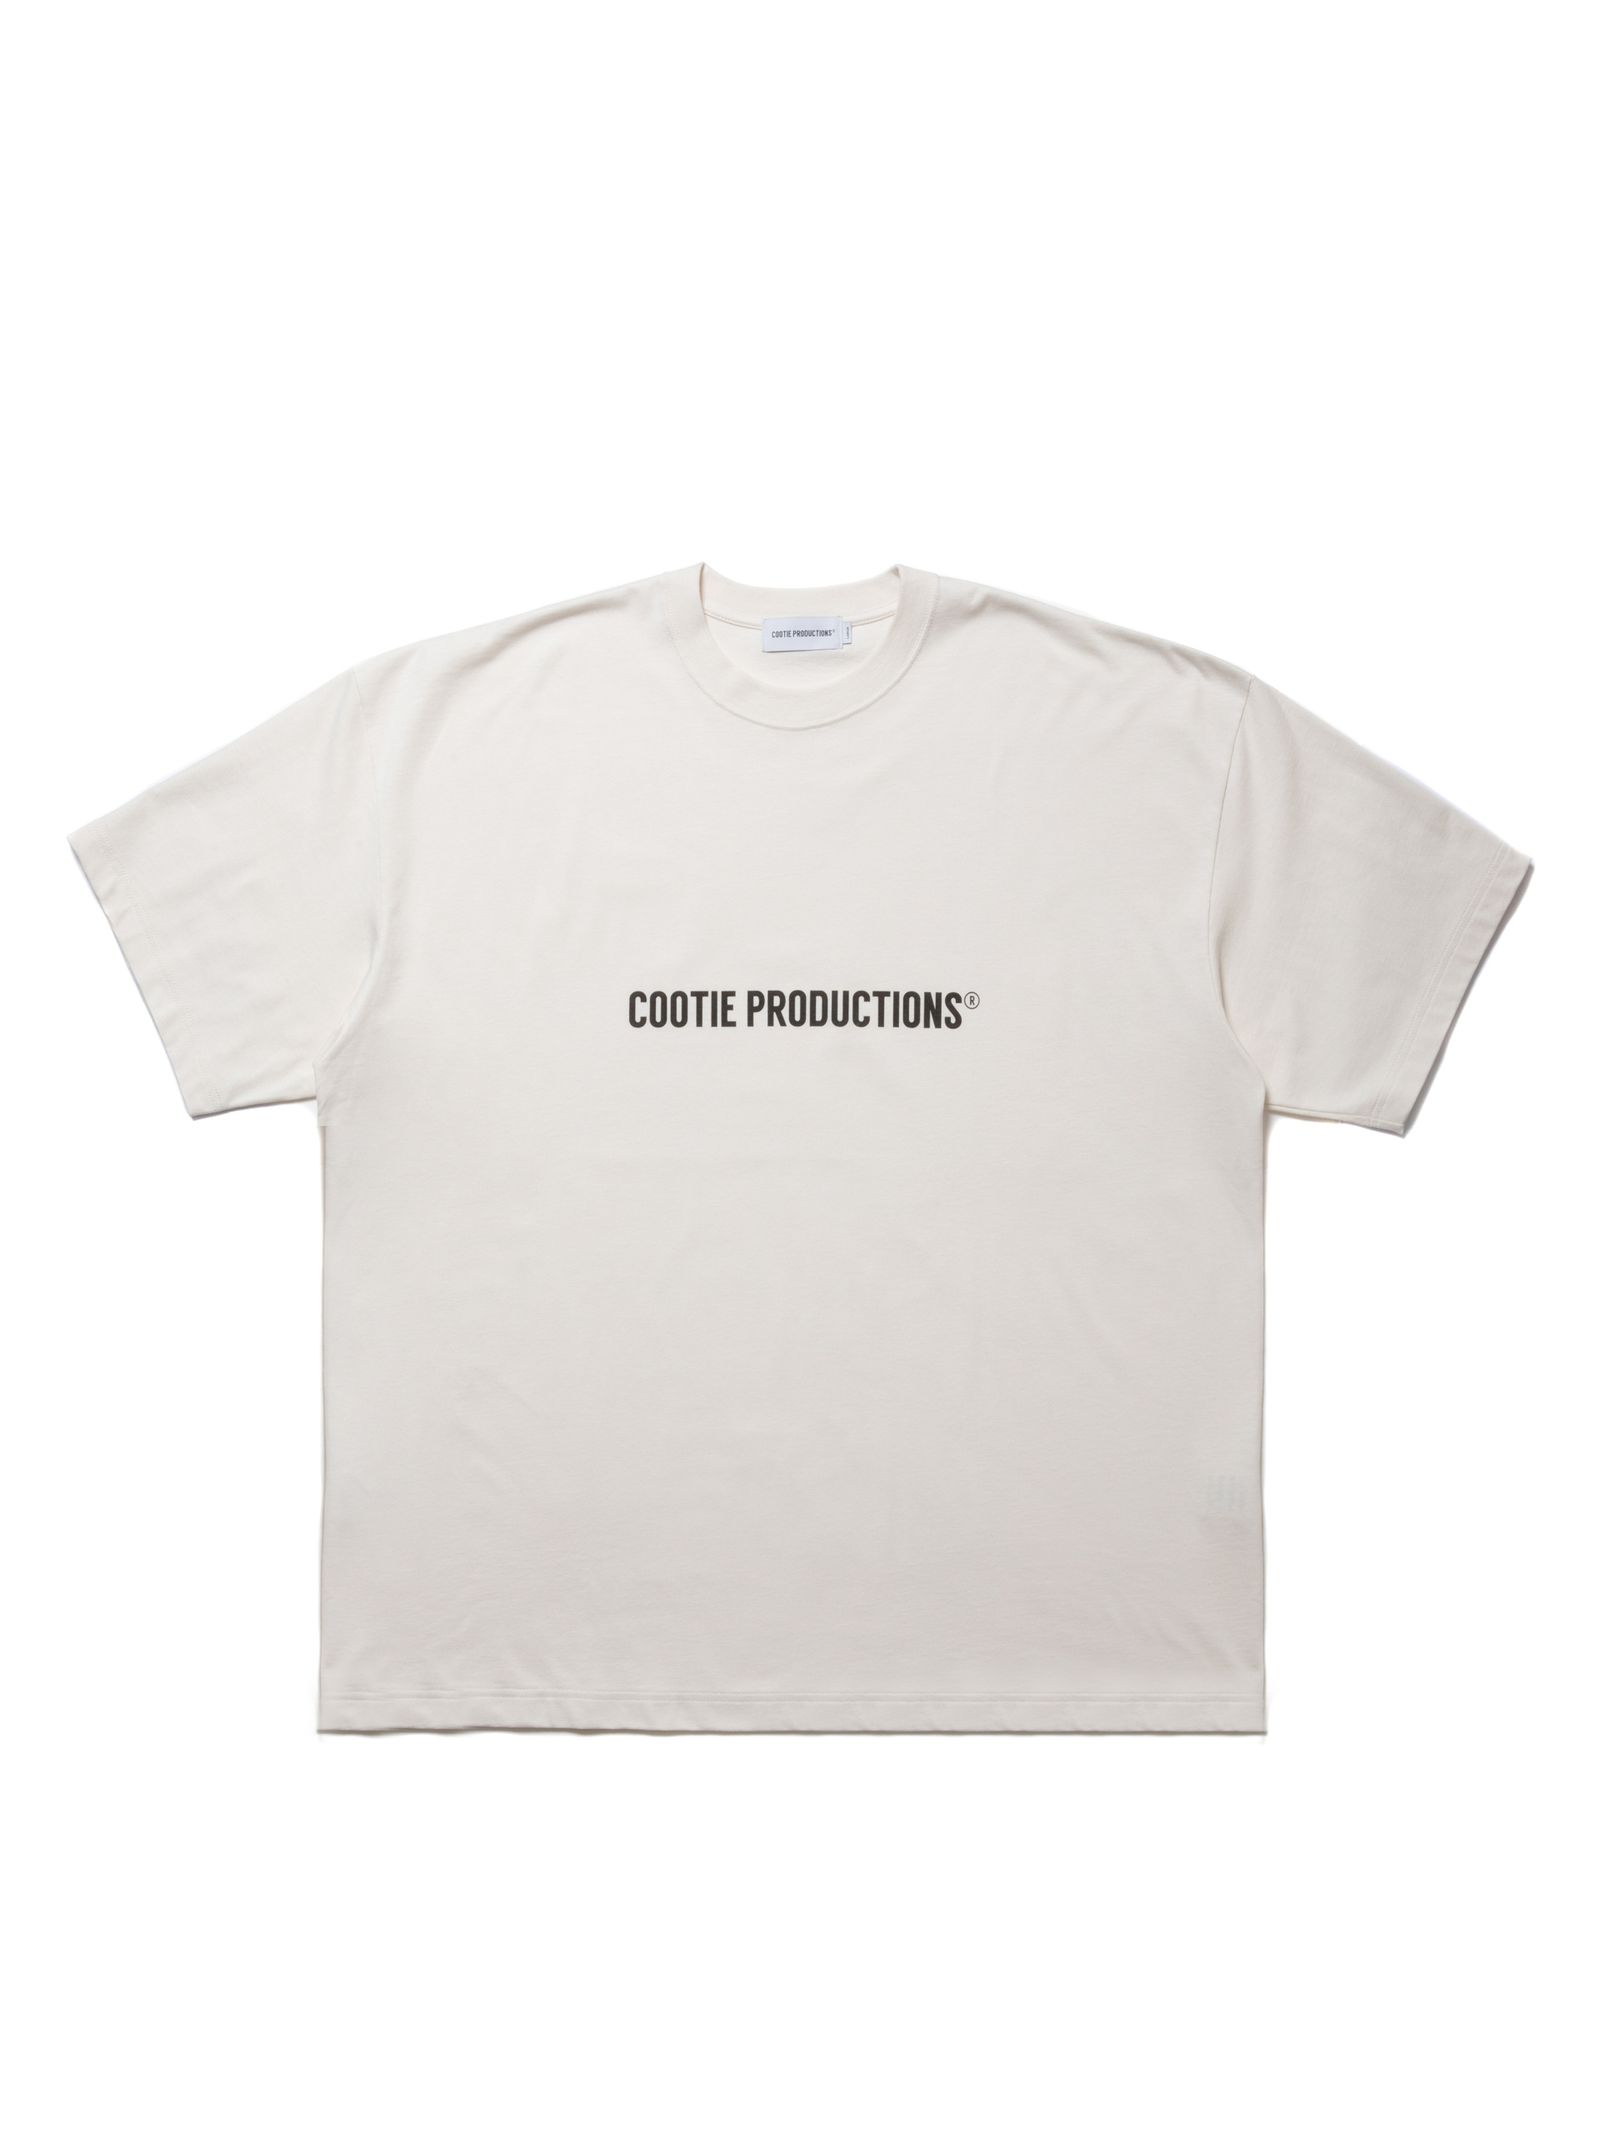 COOTIE PRODUCTIONS - MVS Jersey Print S/S Tee - 2 (BLACK) / ロゴ 